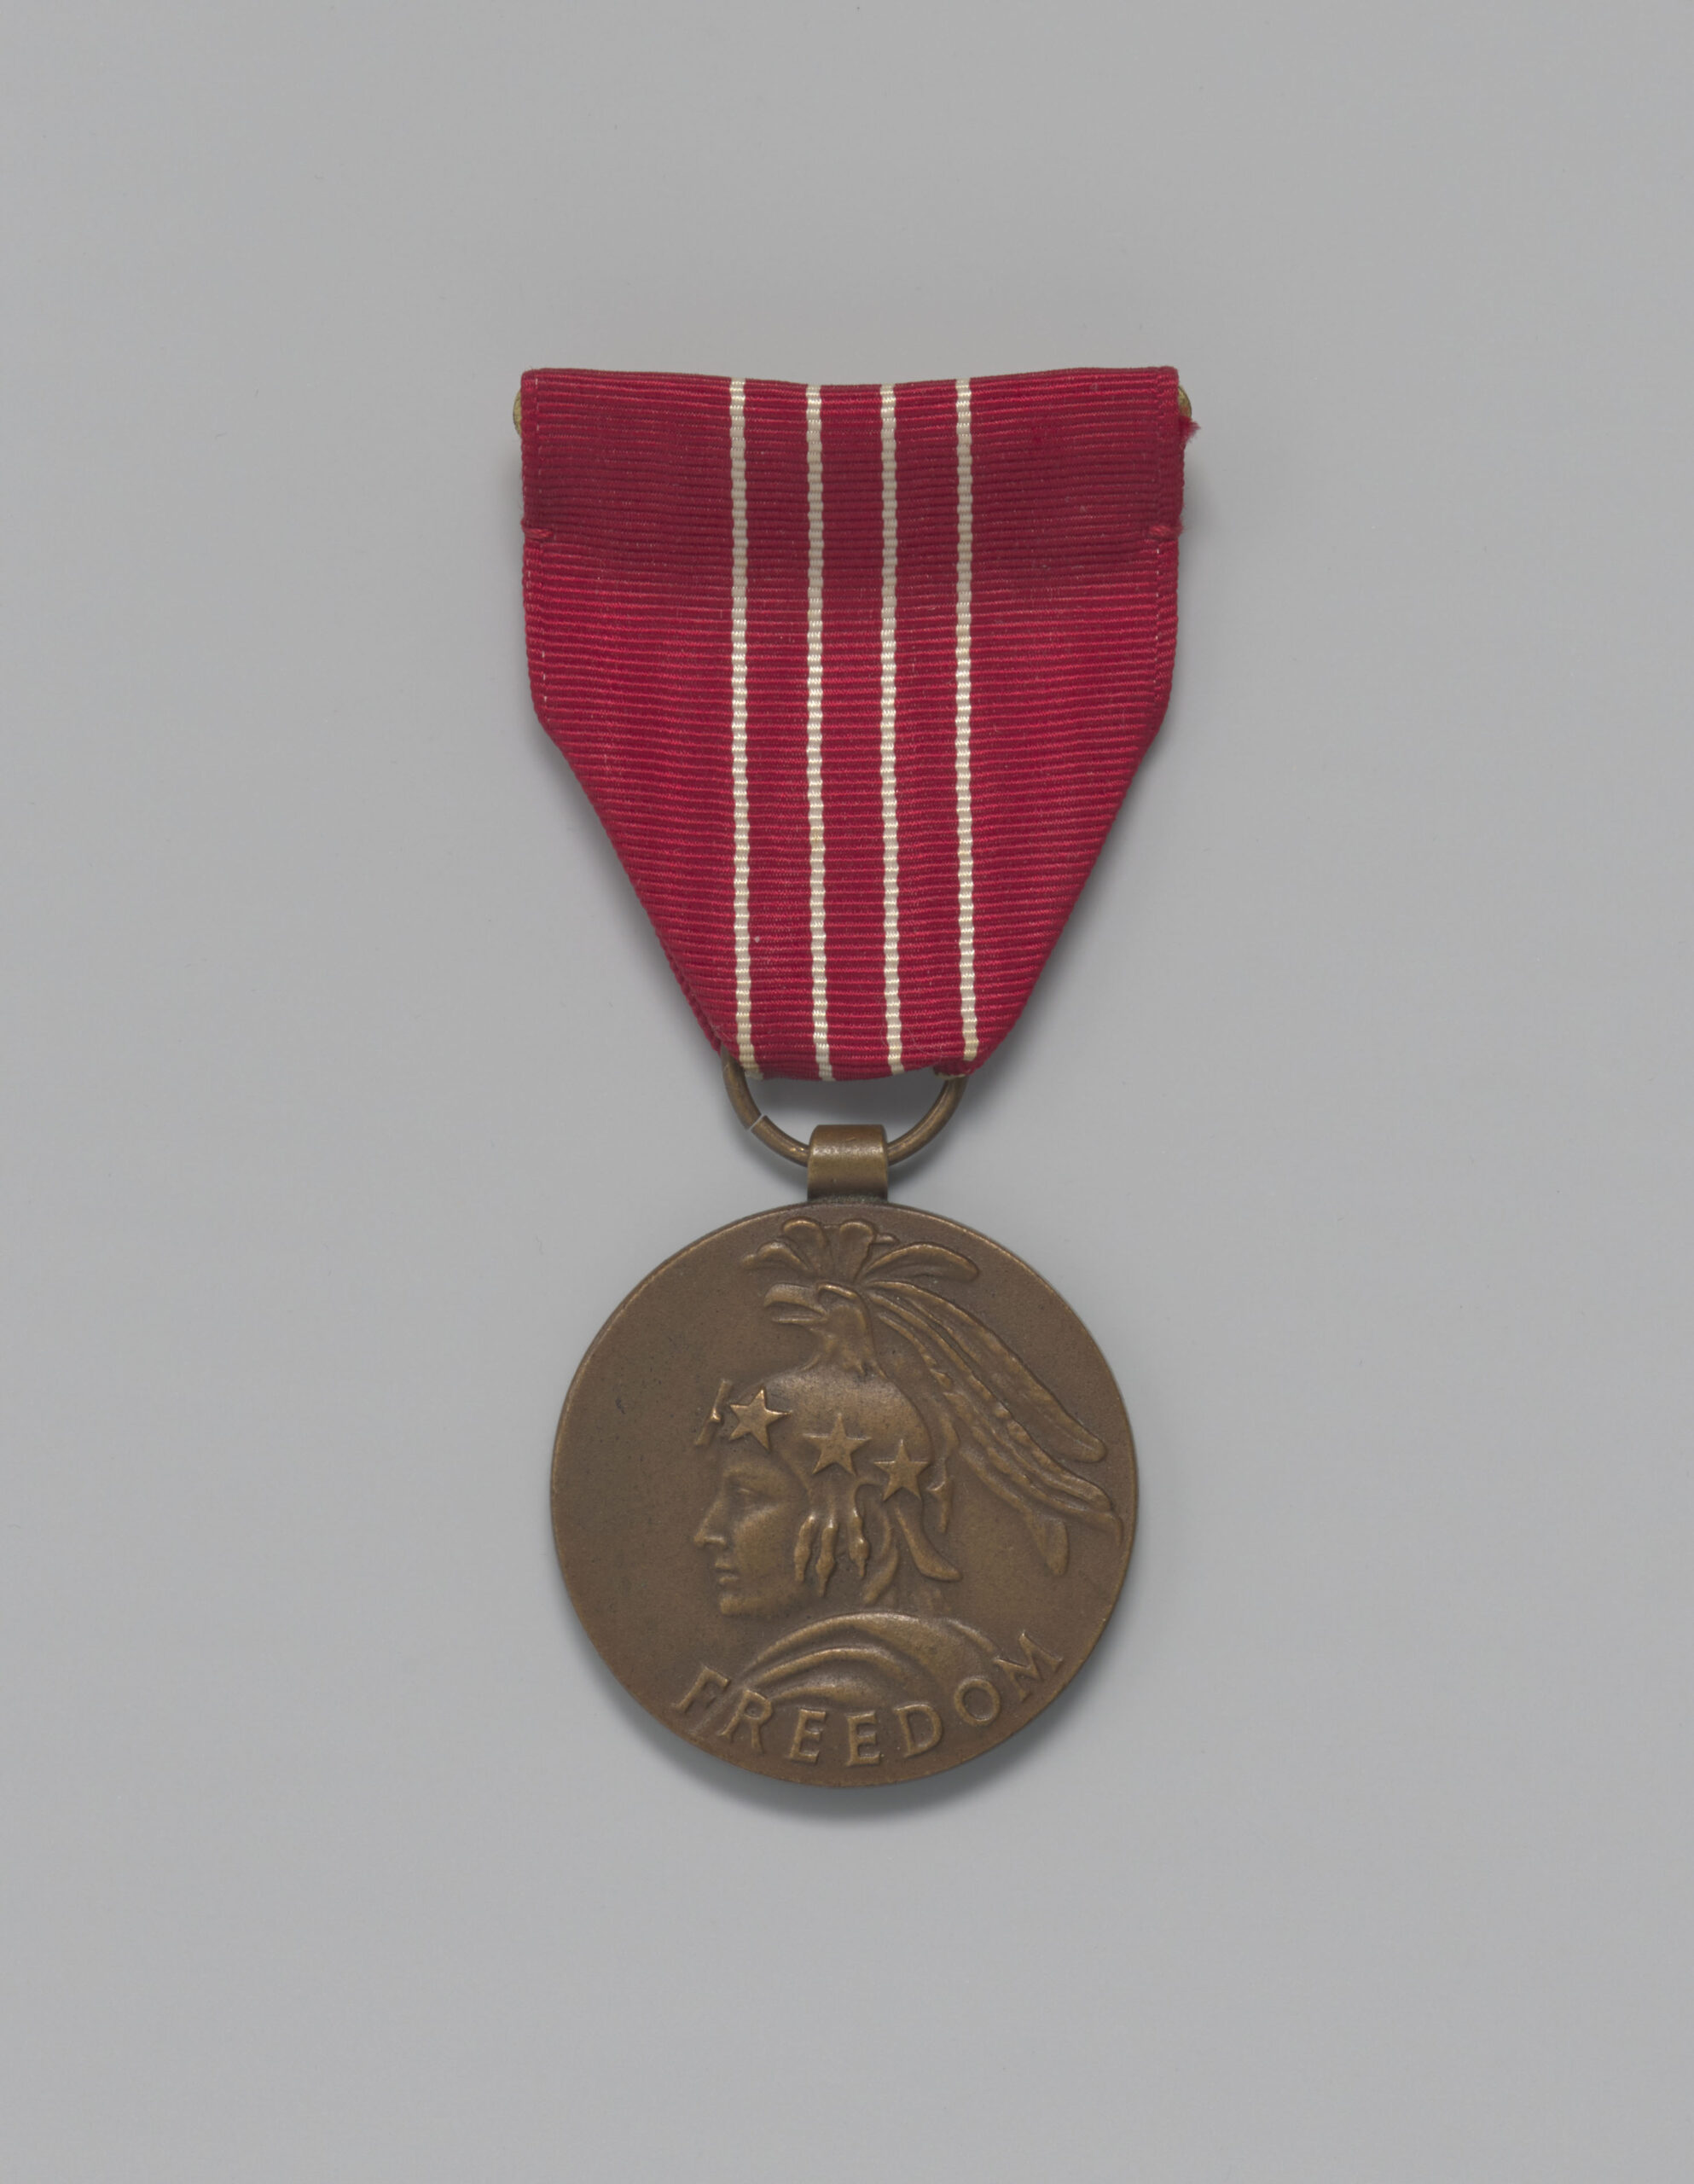 a bronze medal on a gray background